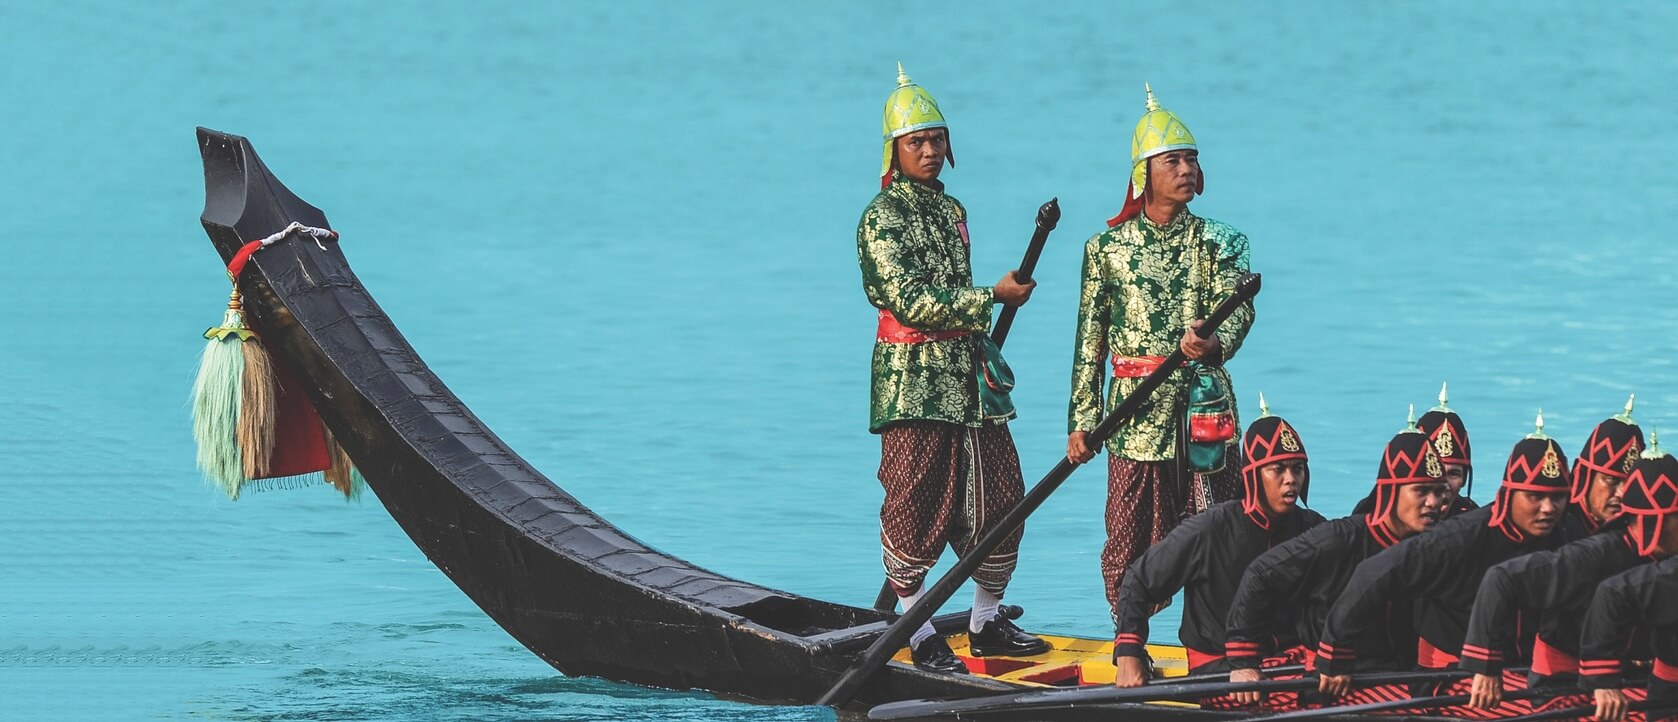 Locals in Bangkok dressed in traditional wear in an ancient styled canoe rowing down the canal